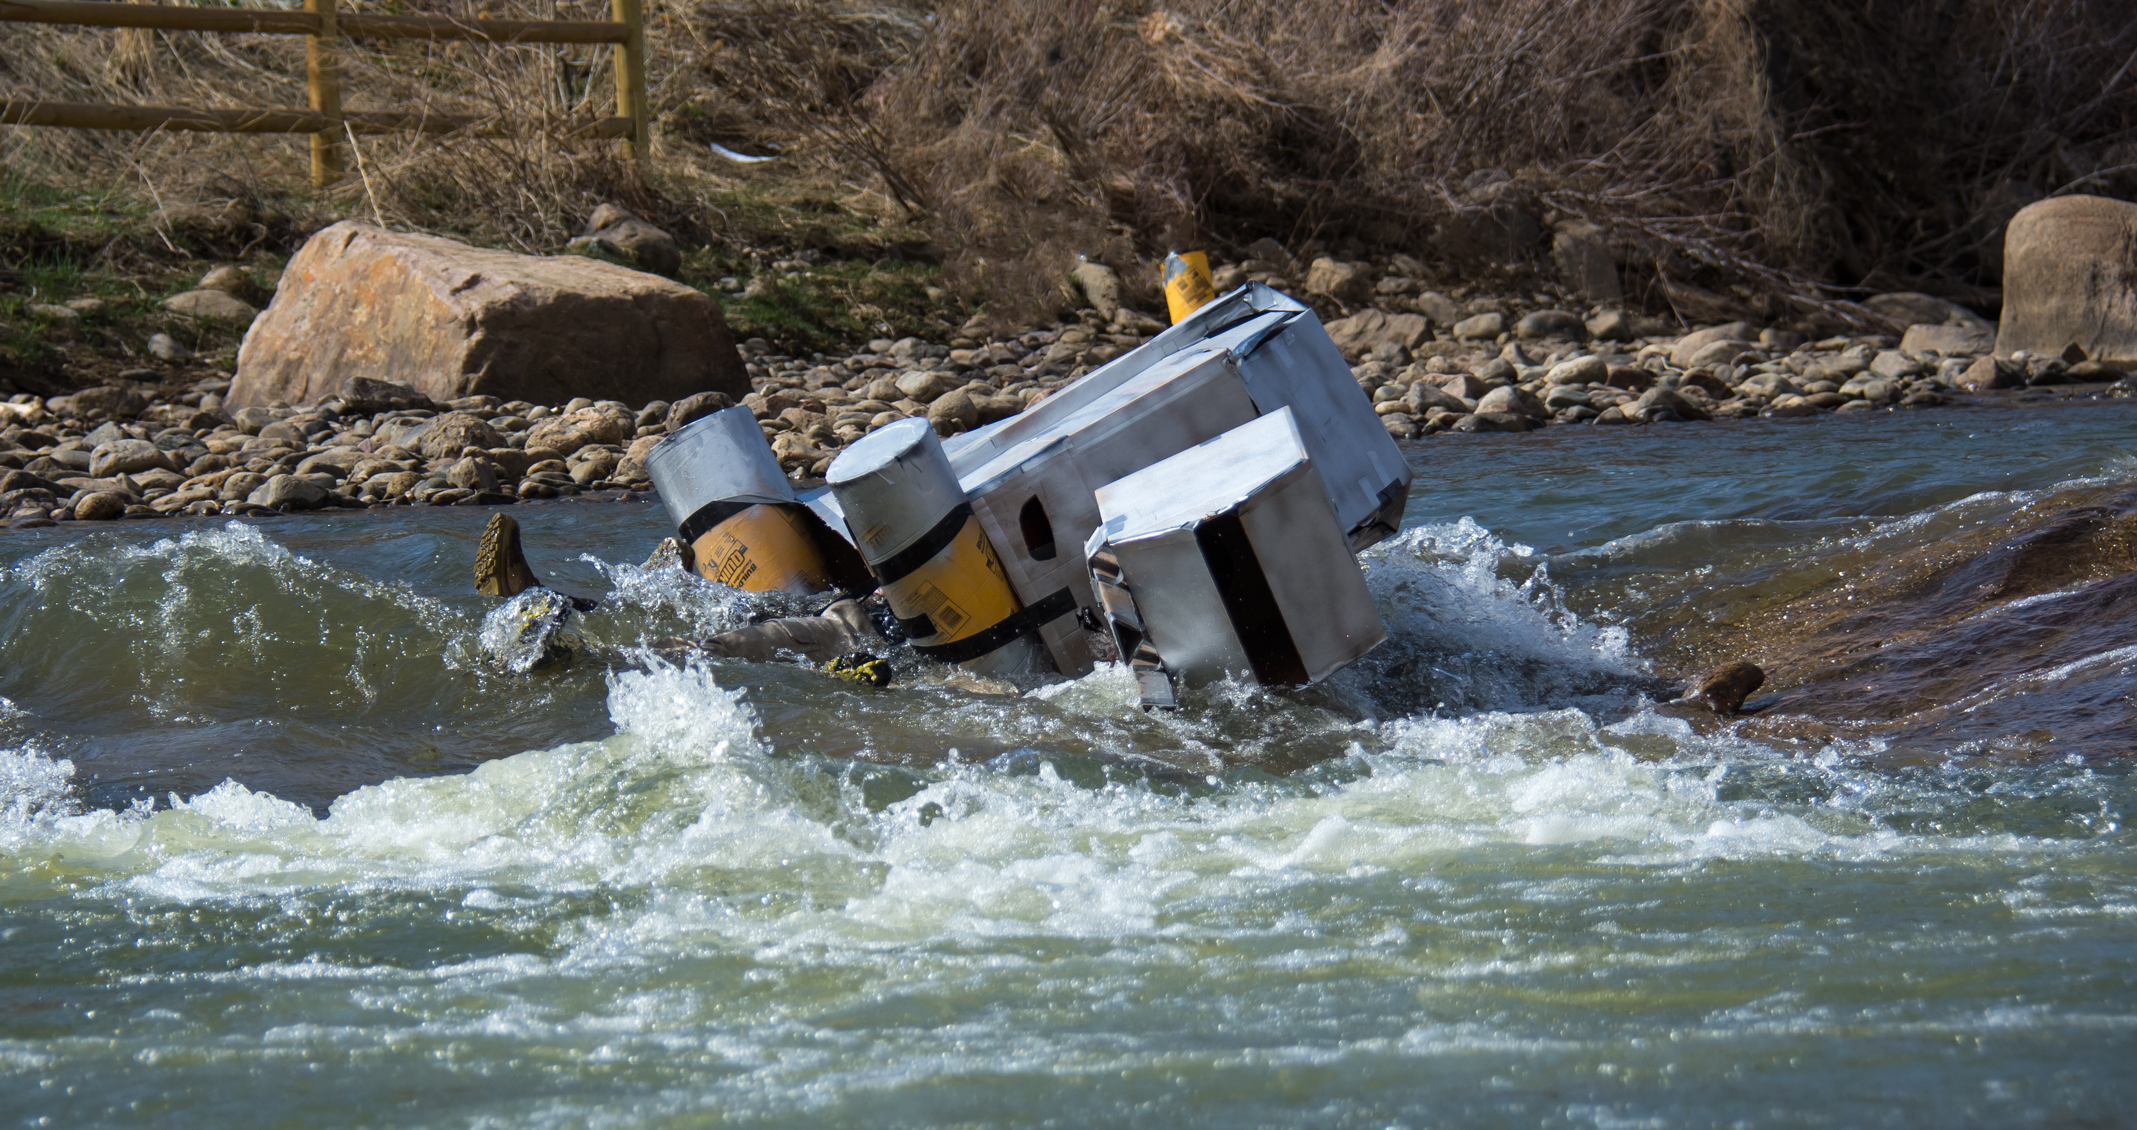 Down Goes the Imperial Walker in the Rapids